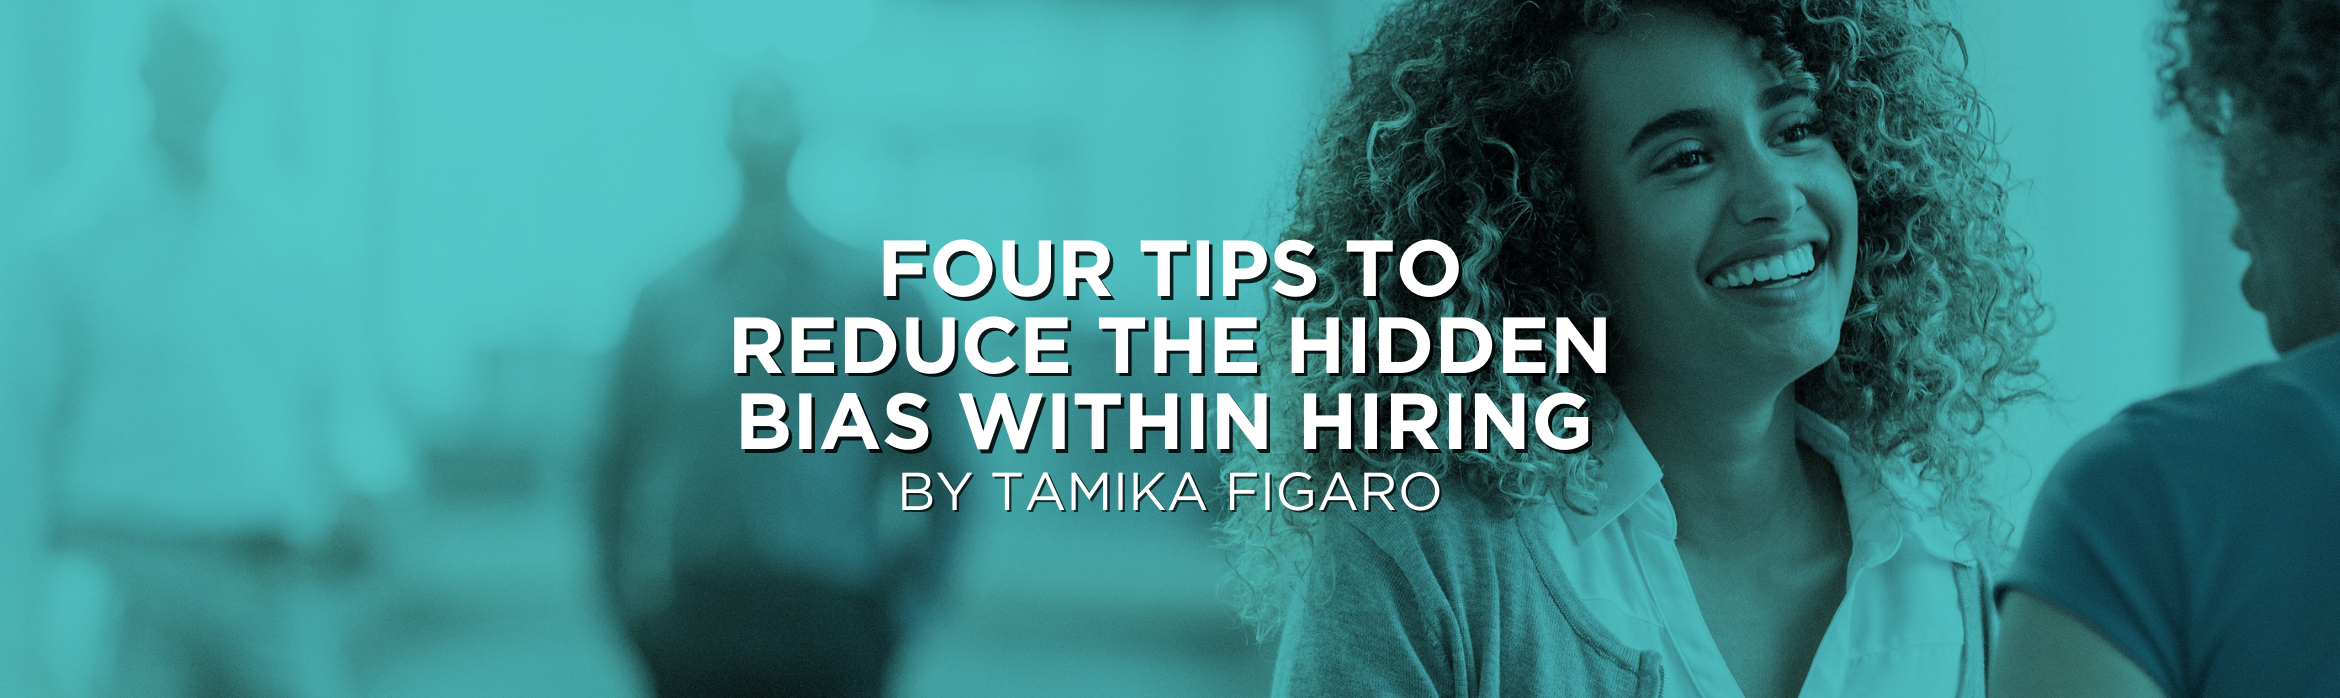 Four Tips to Reduce the Hidden Bias Within Hiring 